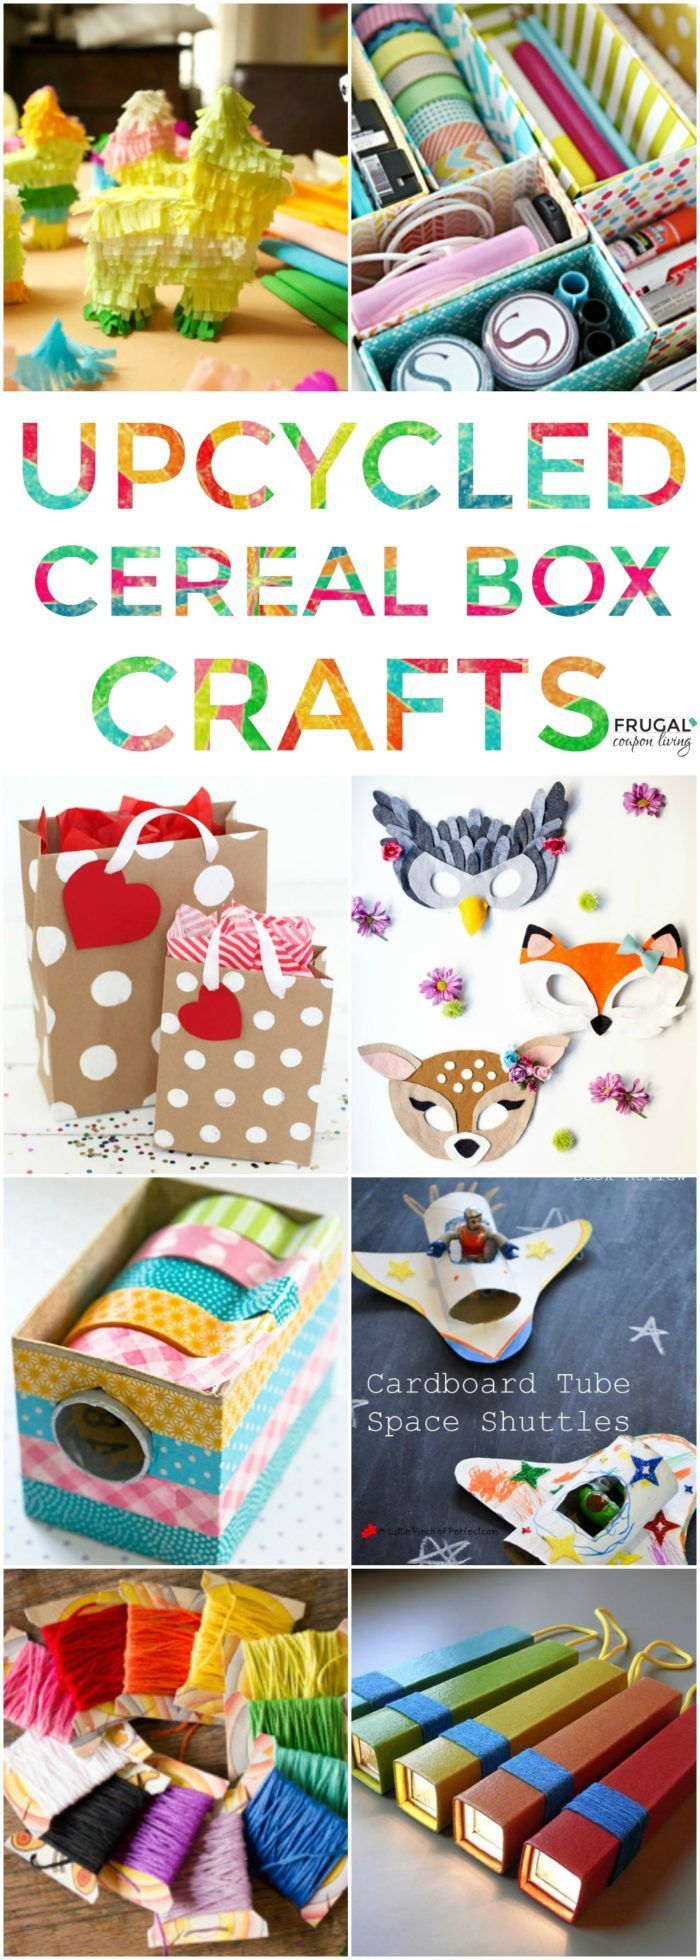 20 recycled crafts for adults
 ideas